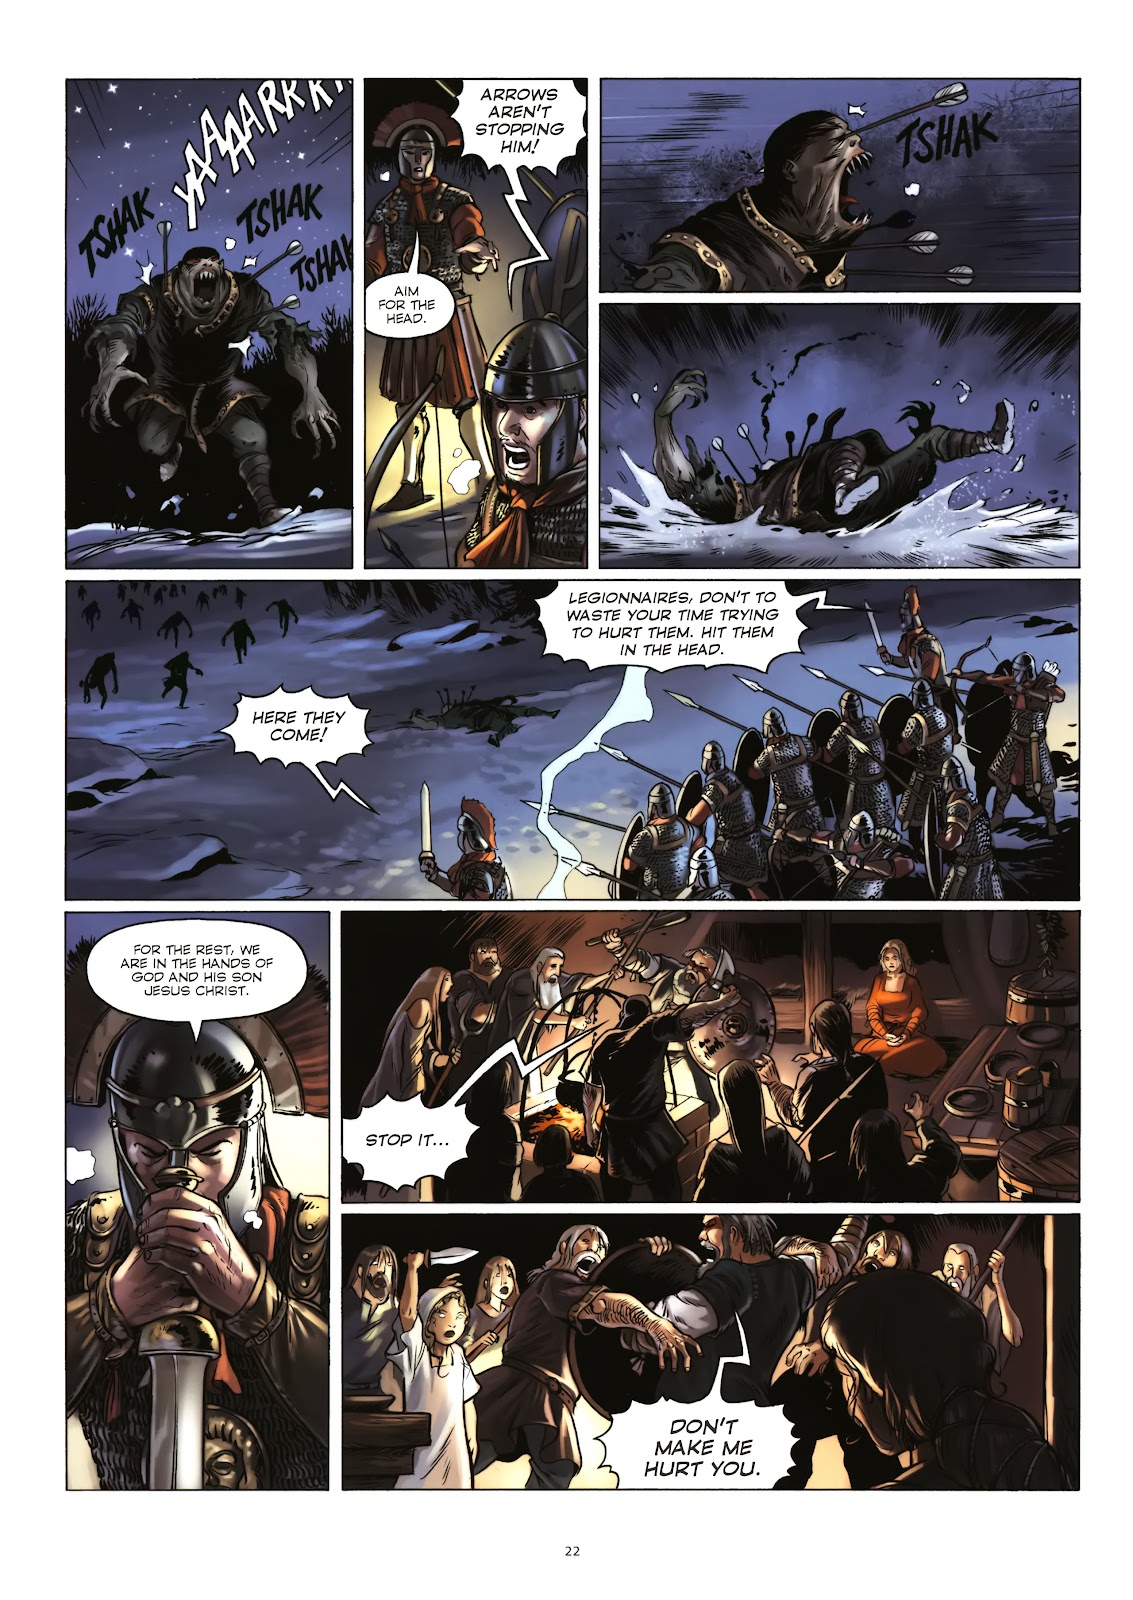 Twilight of the God issue 7 - Page 23